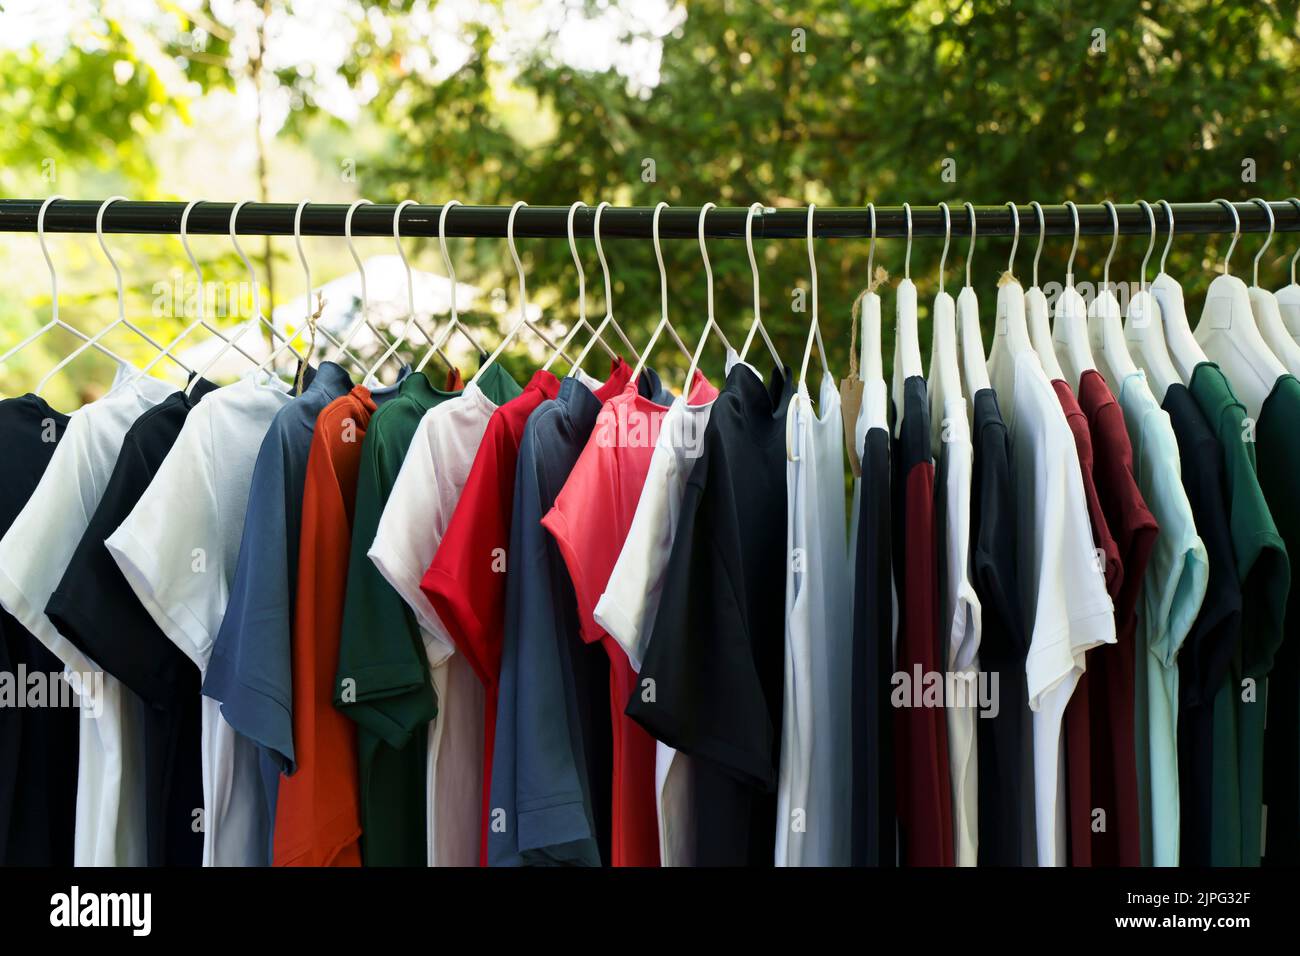 https://c8.alamy.com/comp/2JPG32F/colored-clothes-t-shirts-on-hangers-in-the-market-high-quality-photo-2JPG32F.jpg